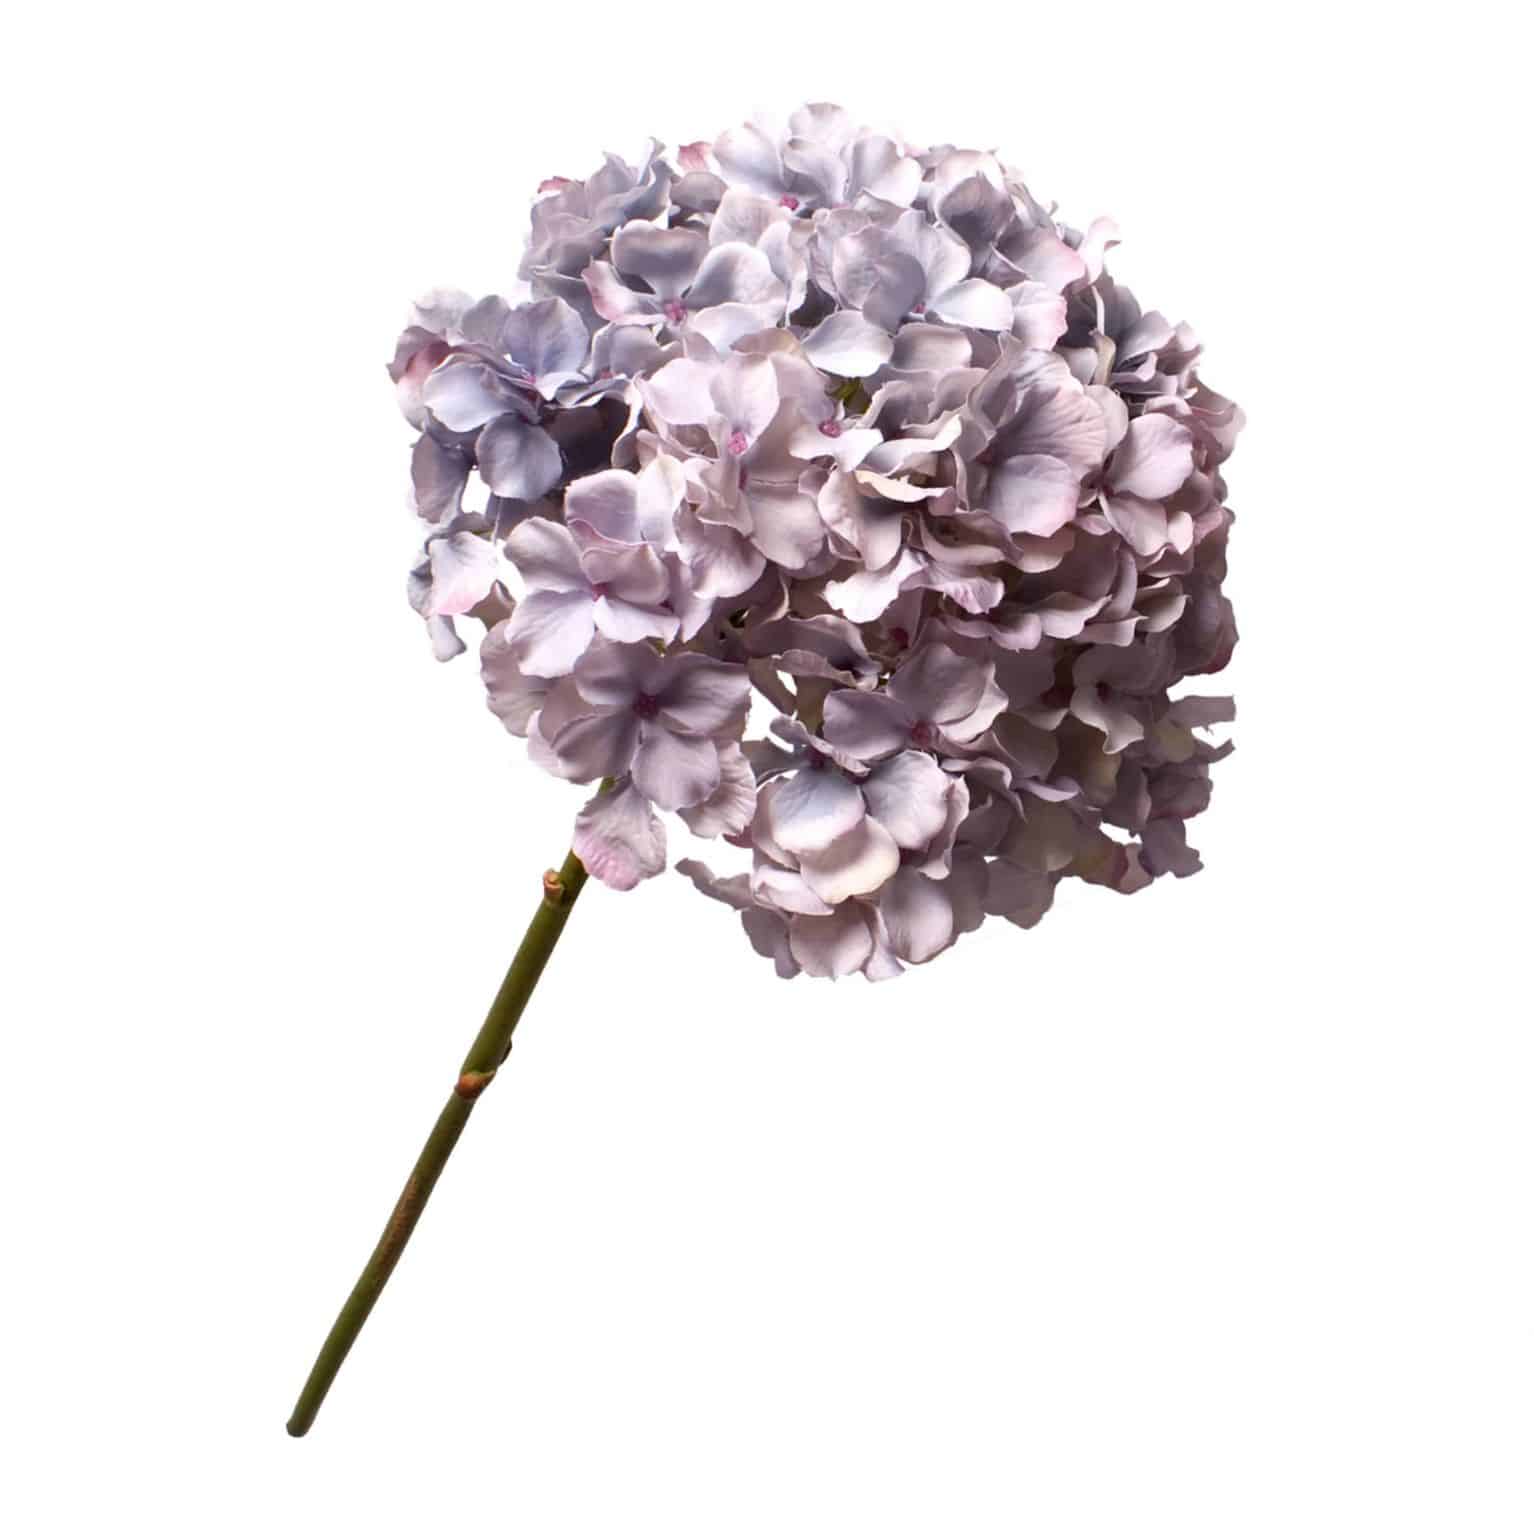 Buy silk hydrangea in authentic lavender blue. A complete arrangement in a single stem & wonderful addition to any arrangement.